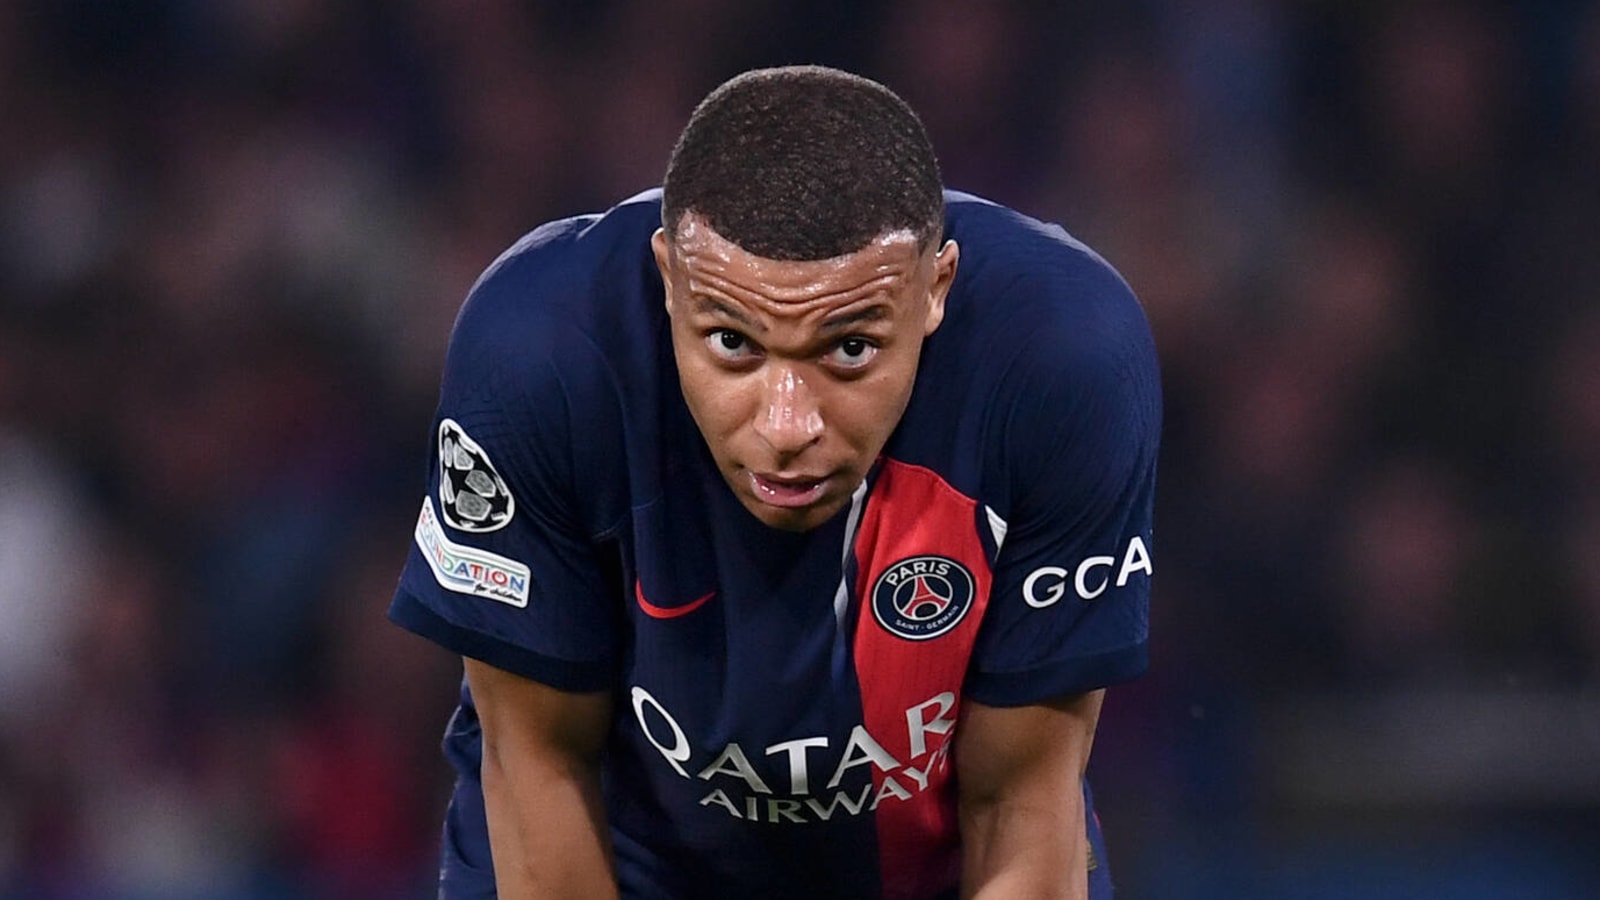 PSG star could leave club with zero Champions League trophies